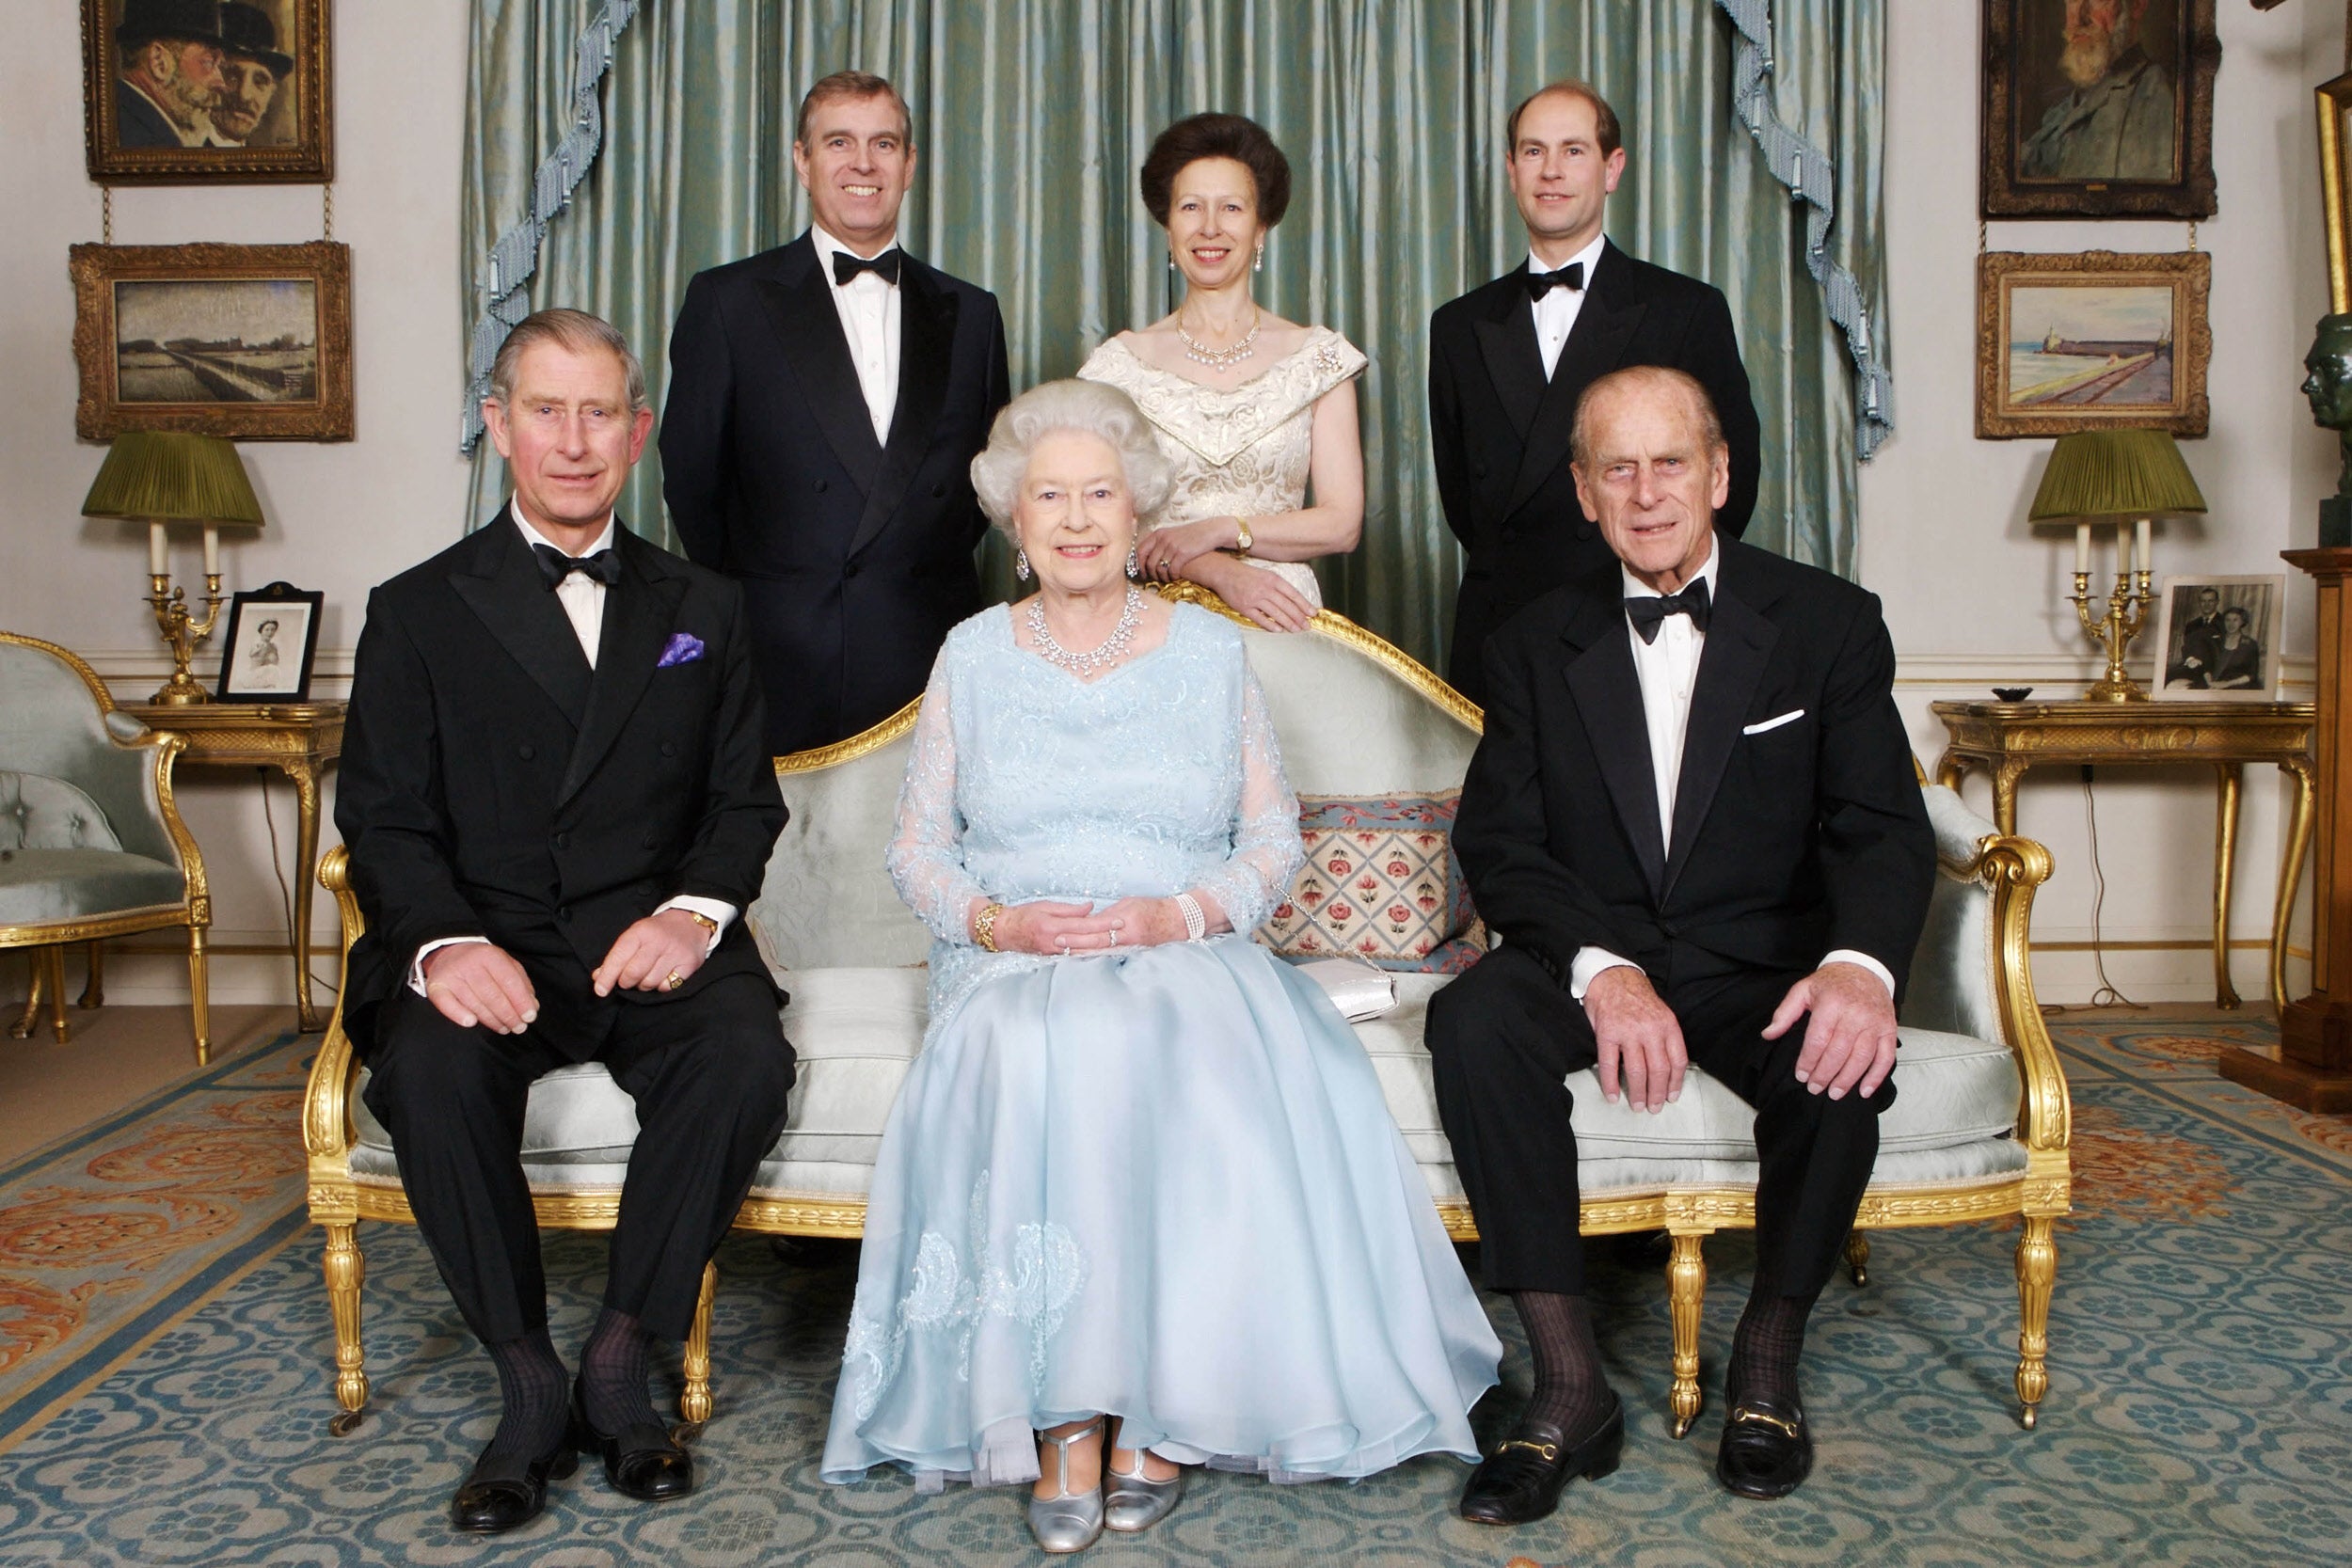 Queen Elizabeth II and Prince Philip at Clarence House with Prince Charles, (Left Foreground) Prince Edward, (Right Background) Princess Anne (Centre Background) and Prince Andrew (Left Background) on the occasion of a dinner hosted by HRH The Prince of Wales and HRH The Duchess of Cornwall to mark the Diamond Wedding Anniversary of The Queen and The Duke, 18 November, 2007